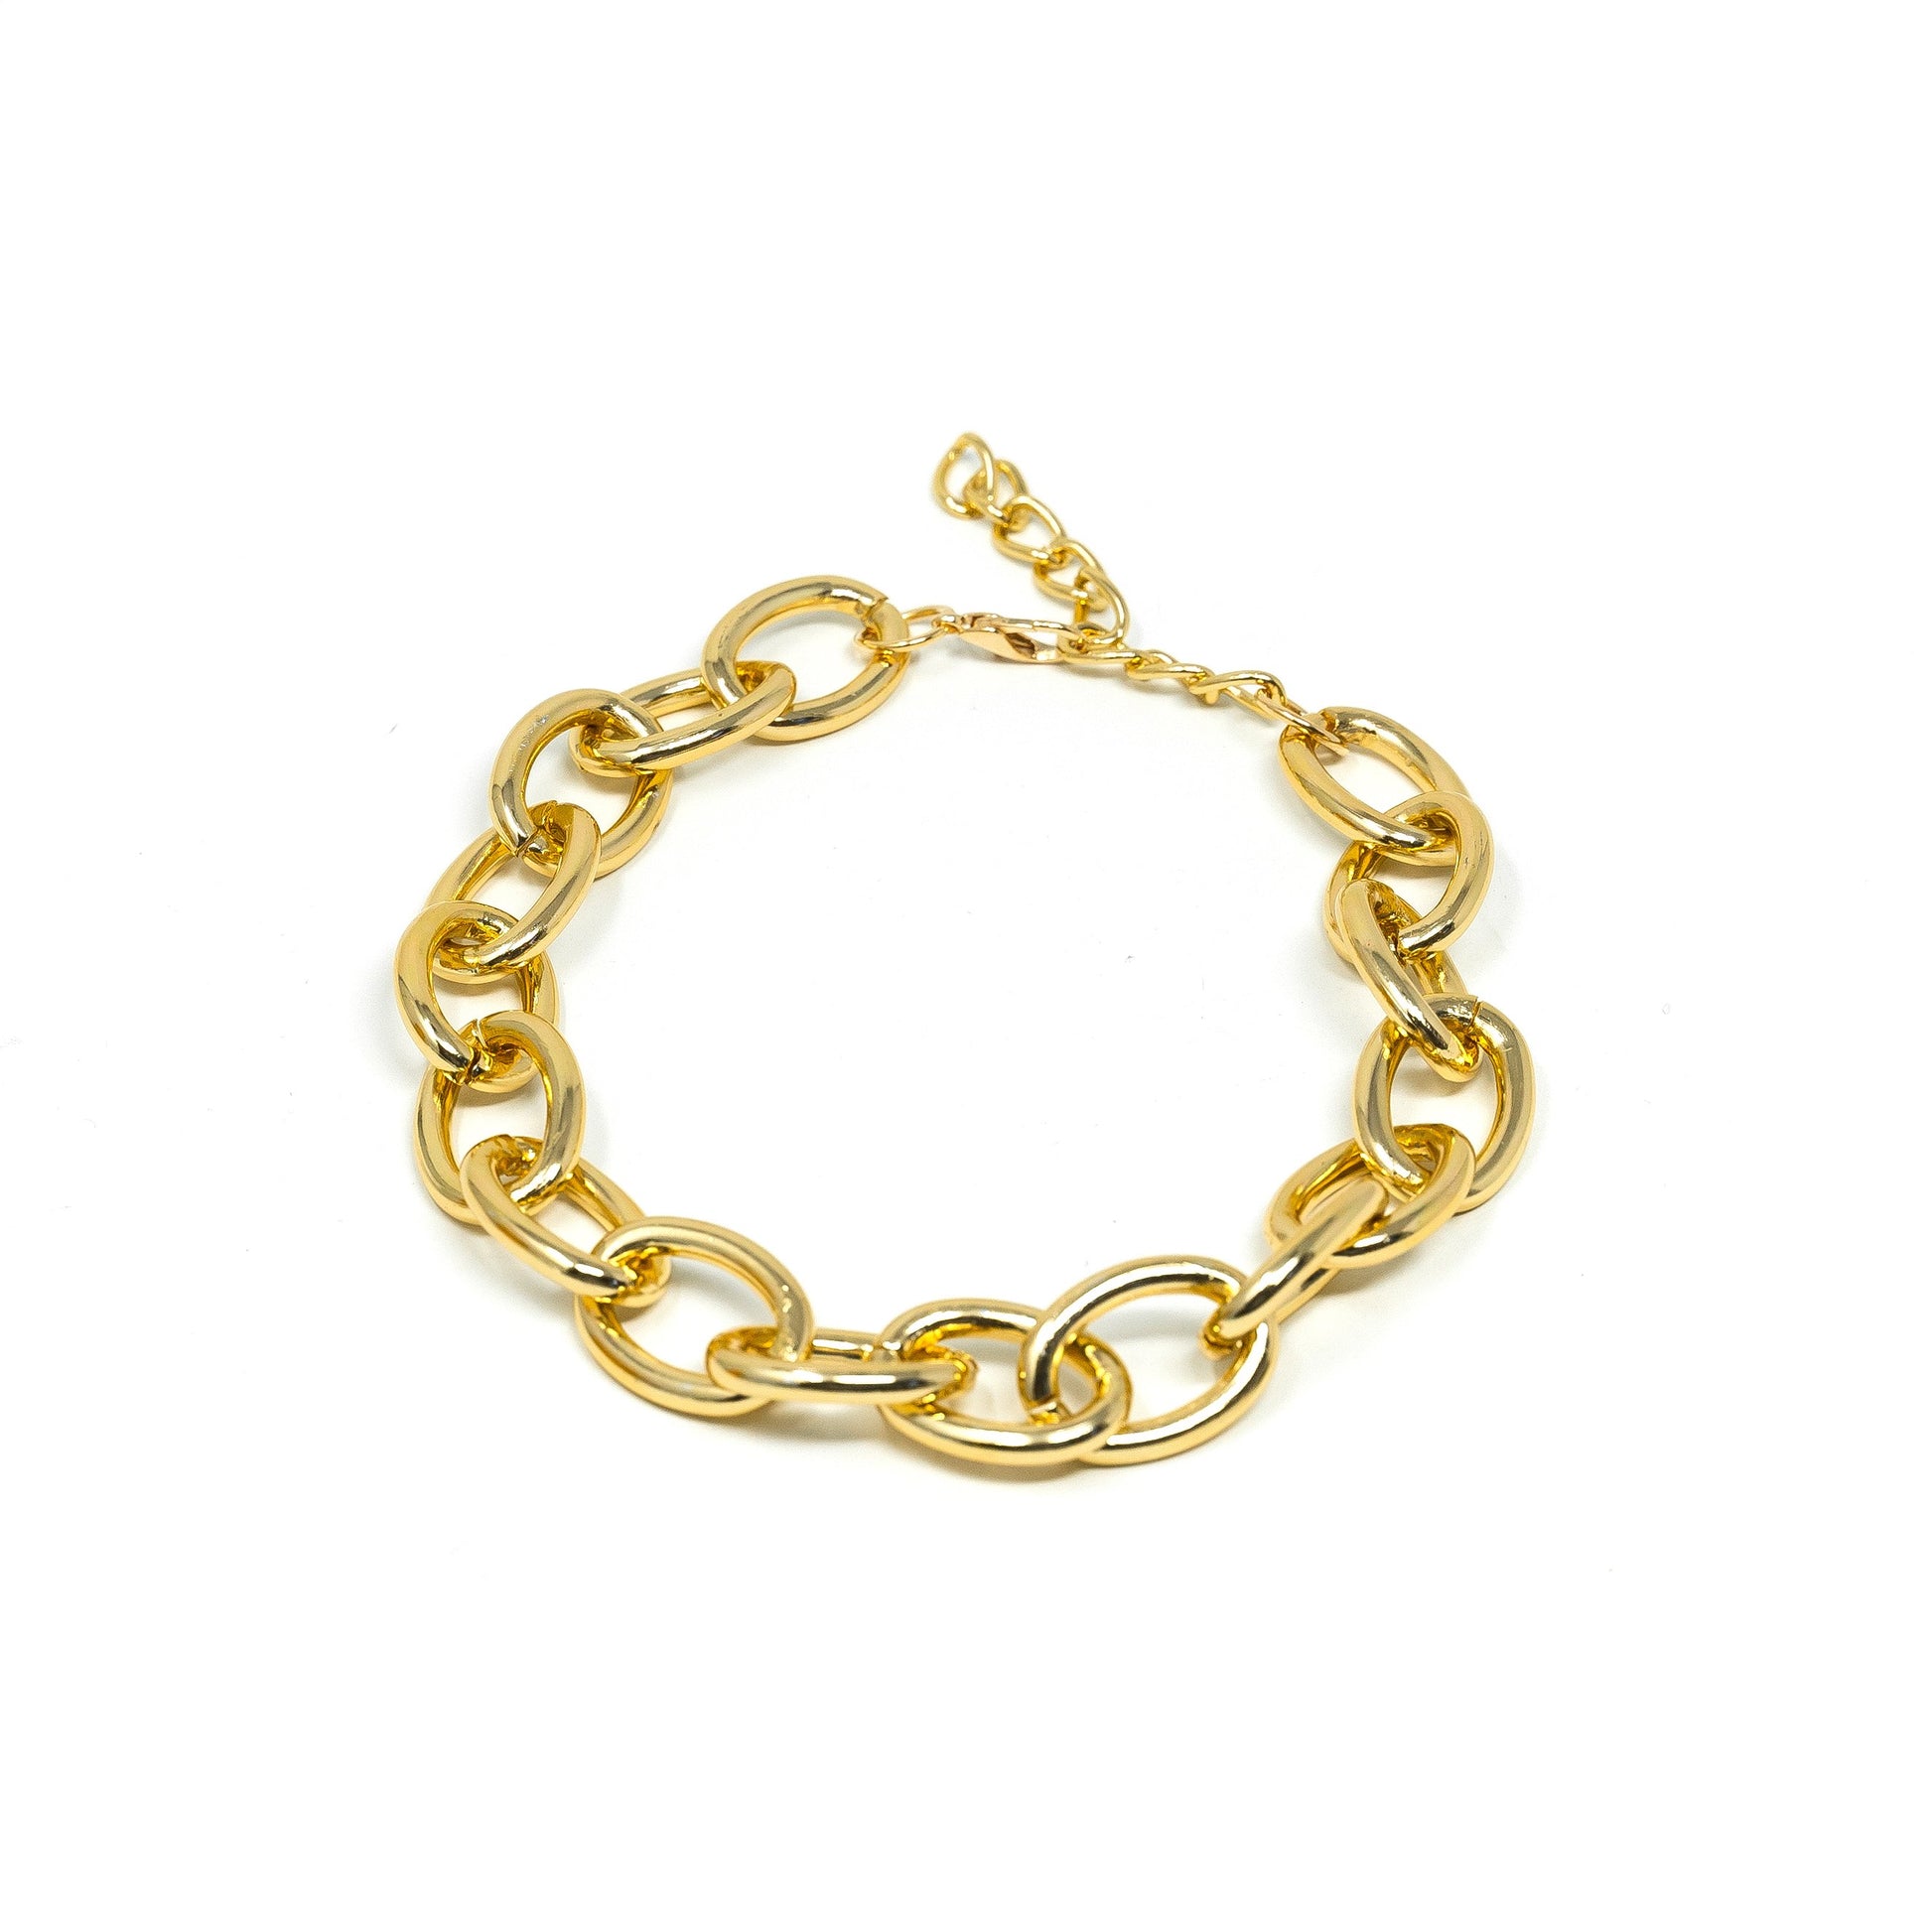 Bold Gold Chain Chokers JEWELRY The Sis Kiss Oval links